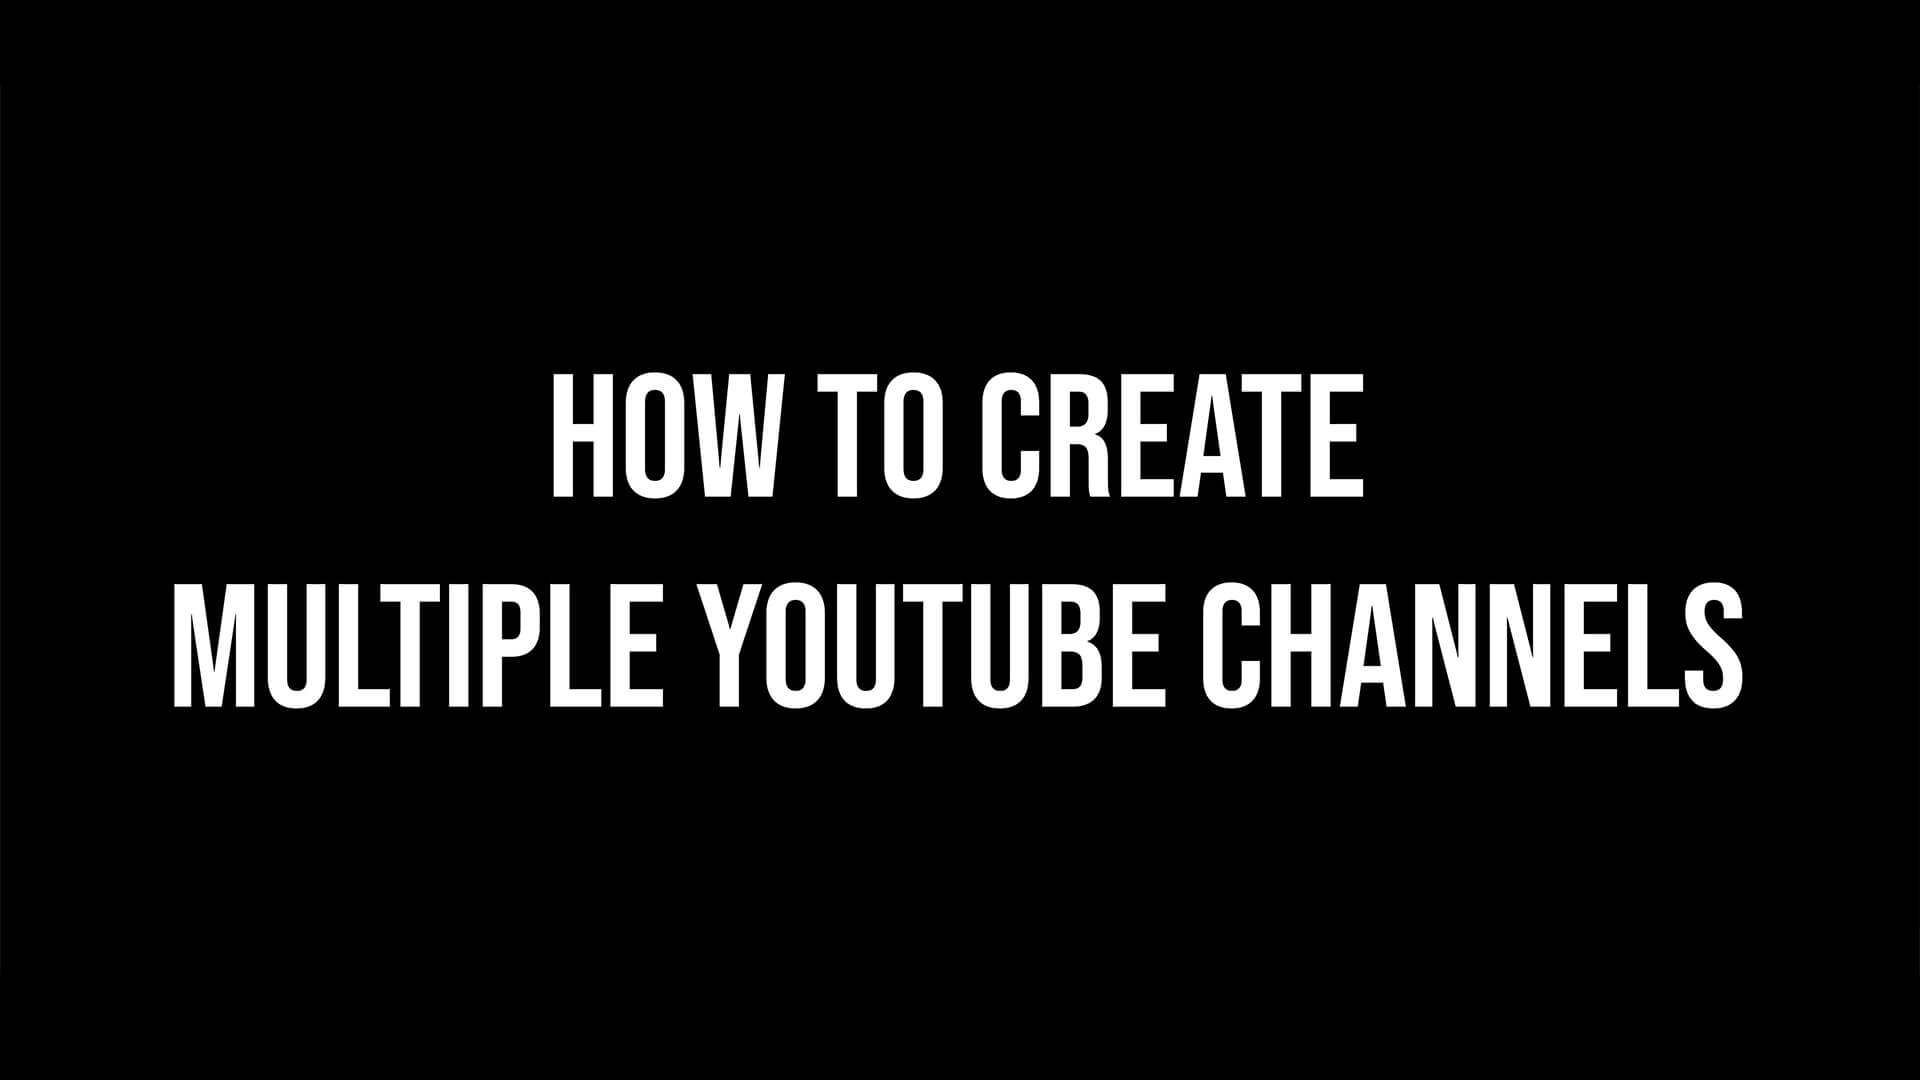 How To Create New YouTube Channels - Multiple YouTube Channels Tutorial (Thumbnail)